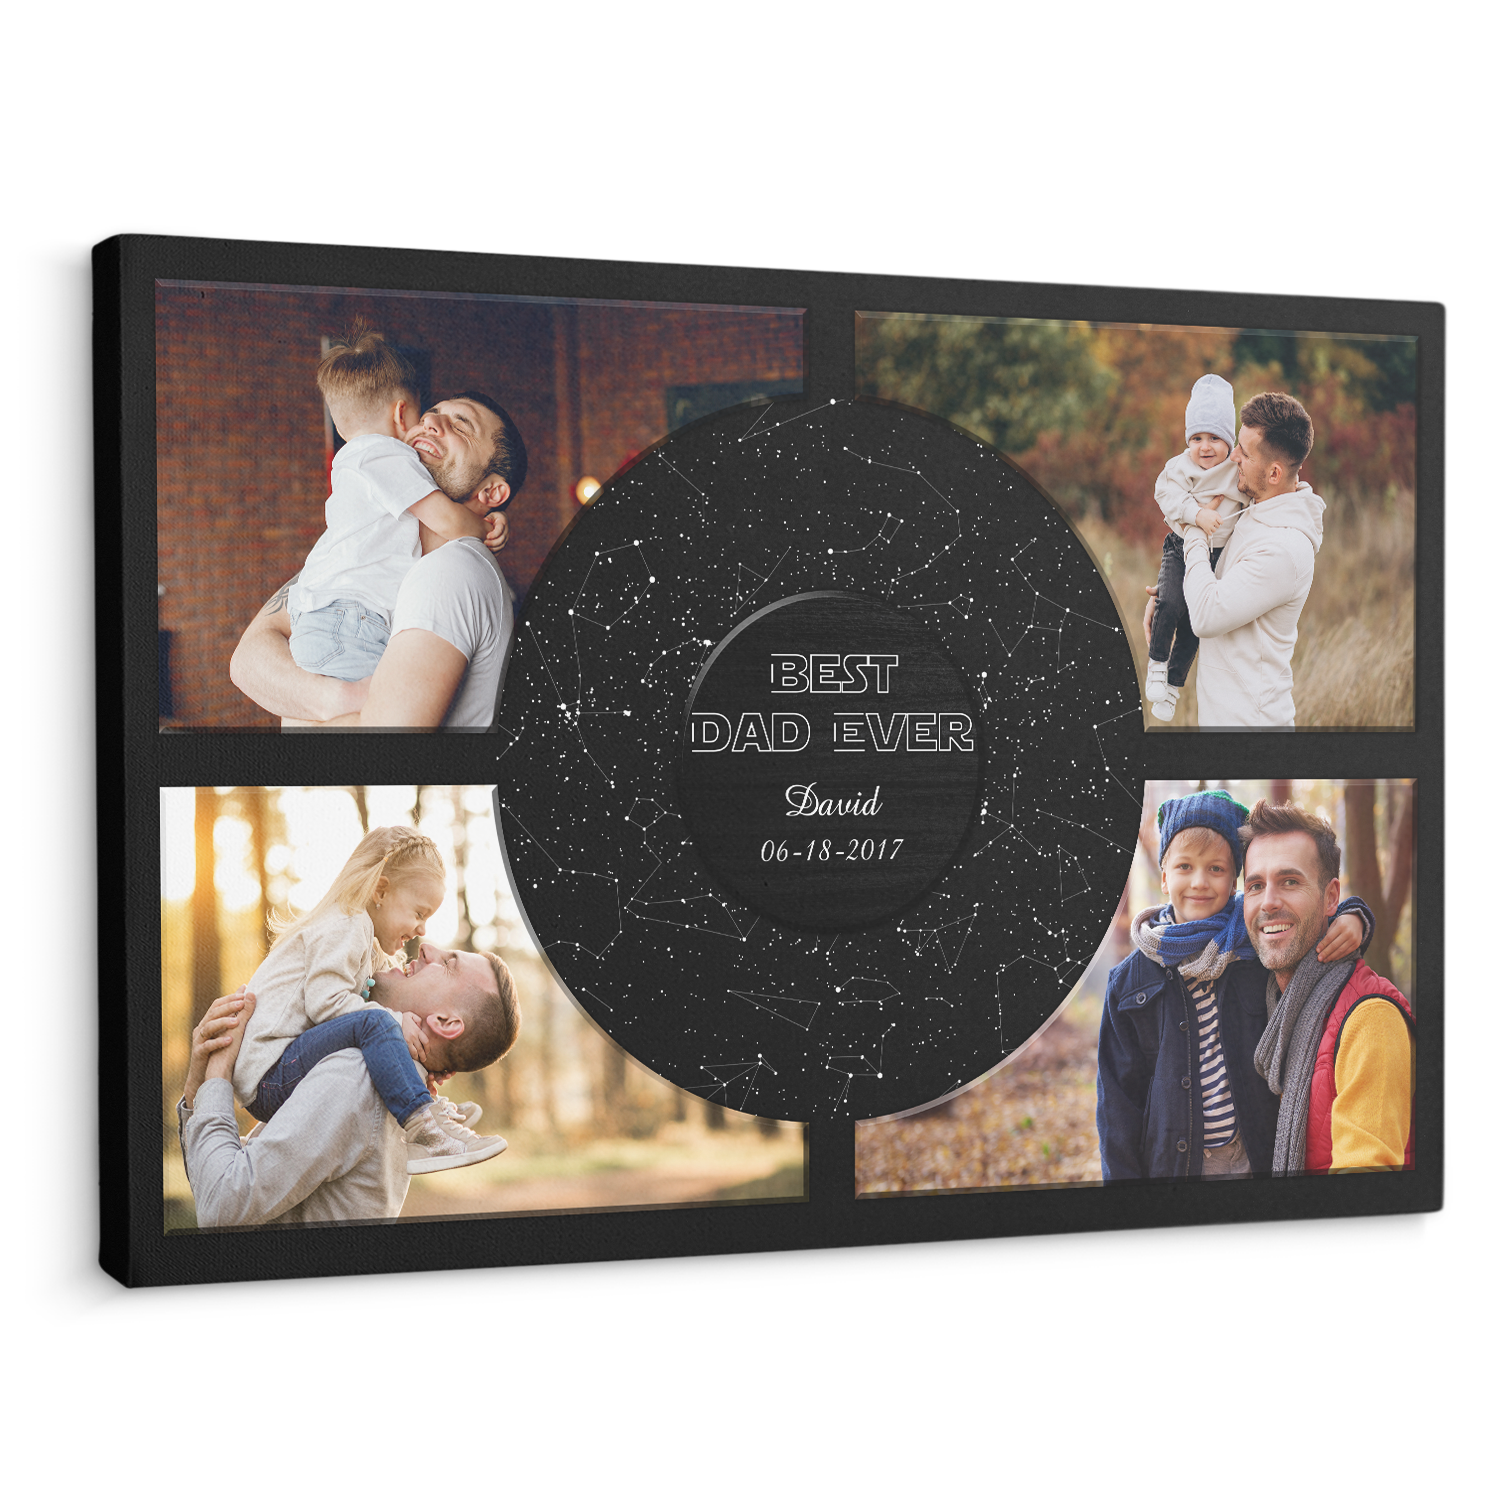 Custom Best Dad Ever Canvas Print, Night Sky By Date And Location